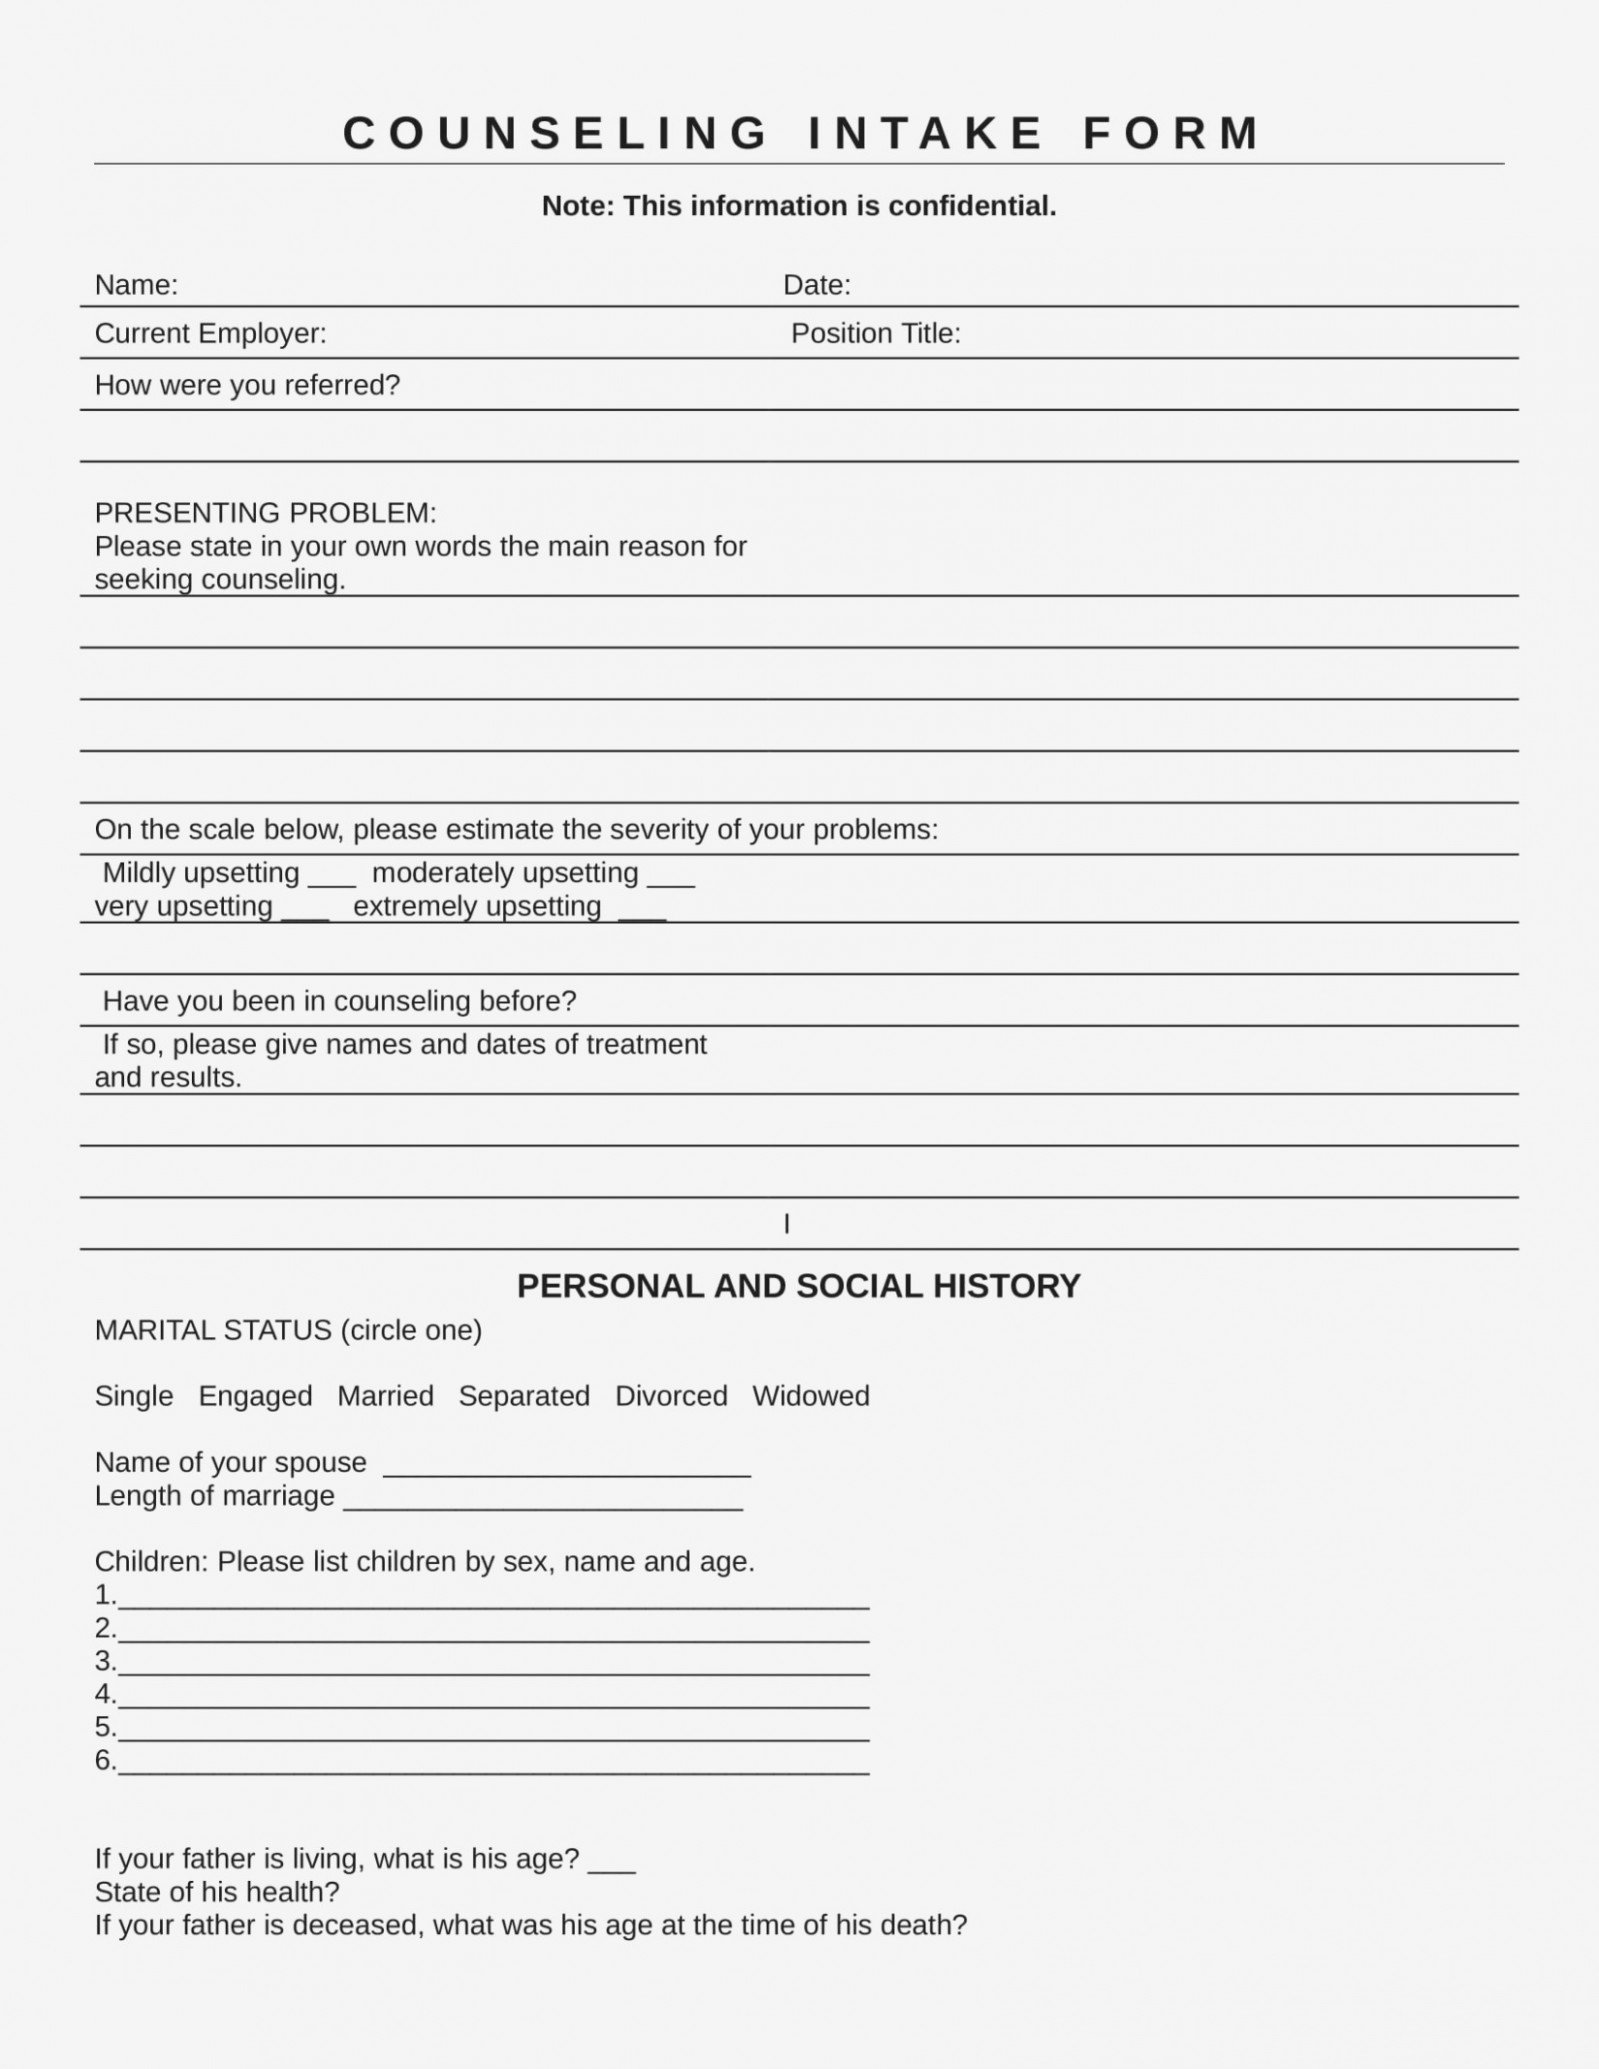 Counseling Intake form Template New You Should Experience Counseling Intake